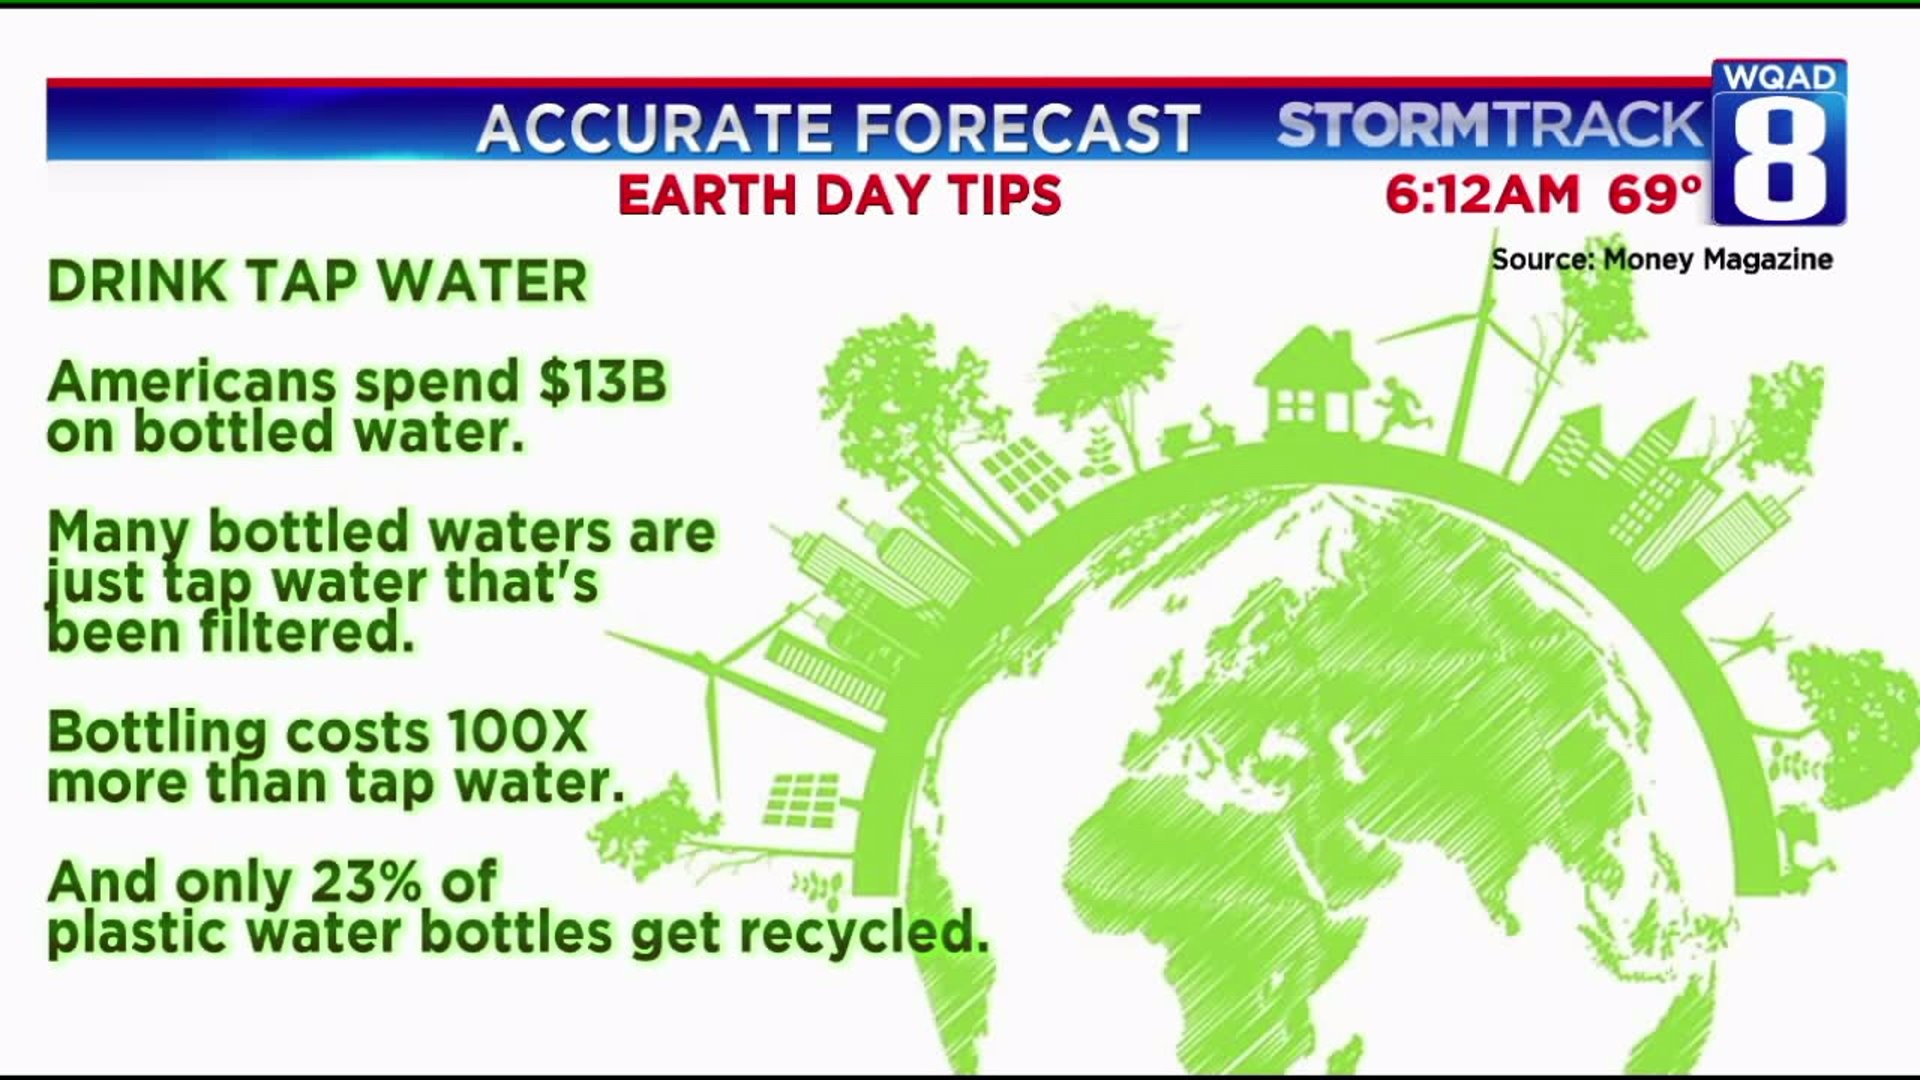 Earth Day Tips